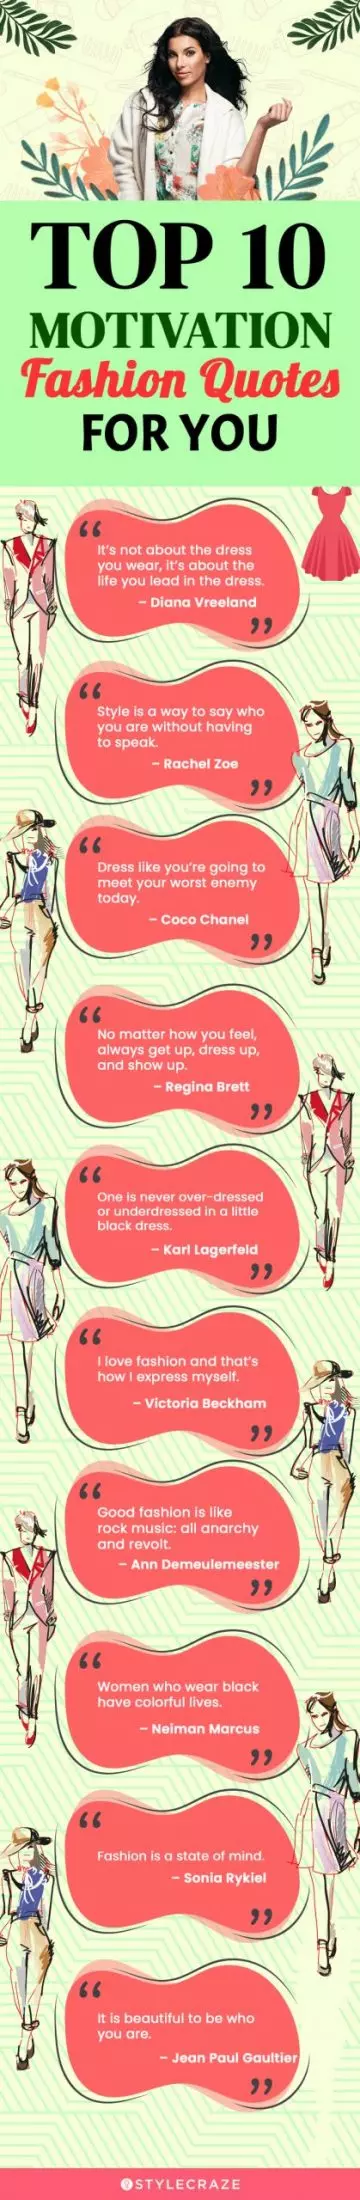 top 10 motivational fashion quotes for you (infographic)